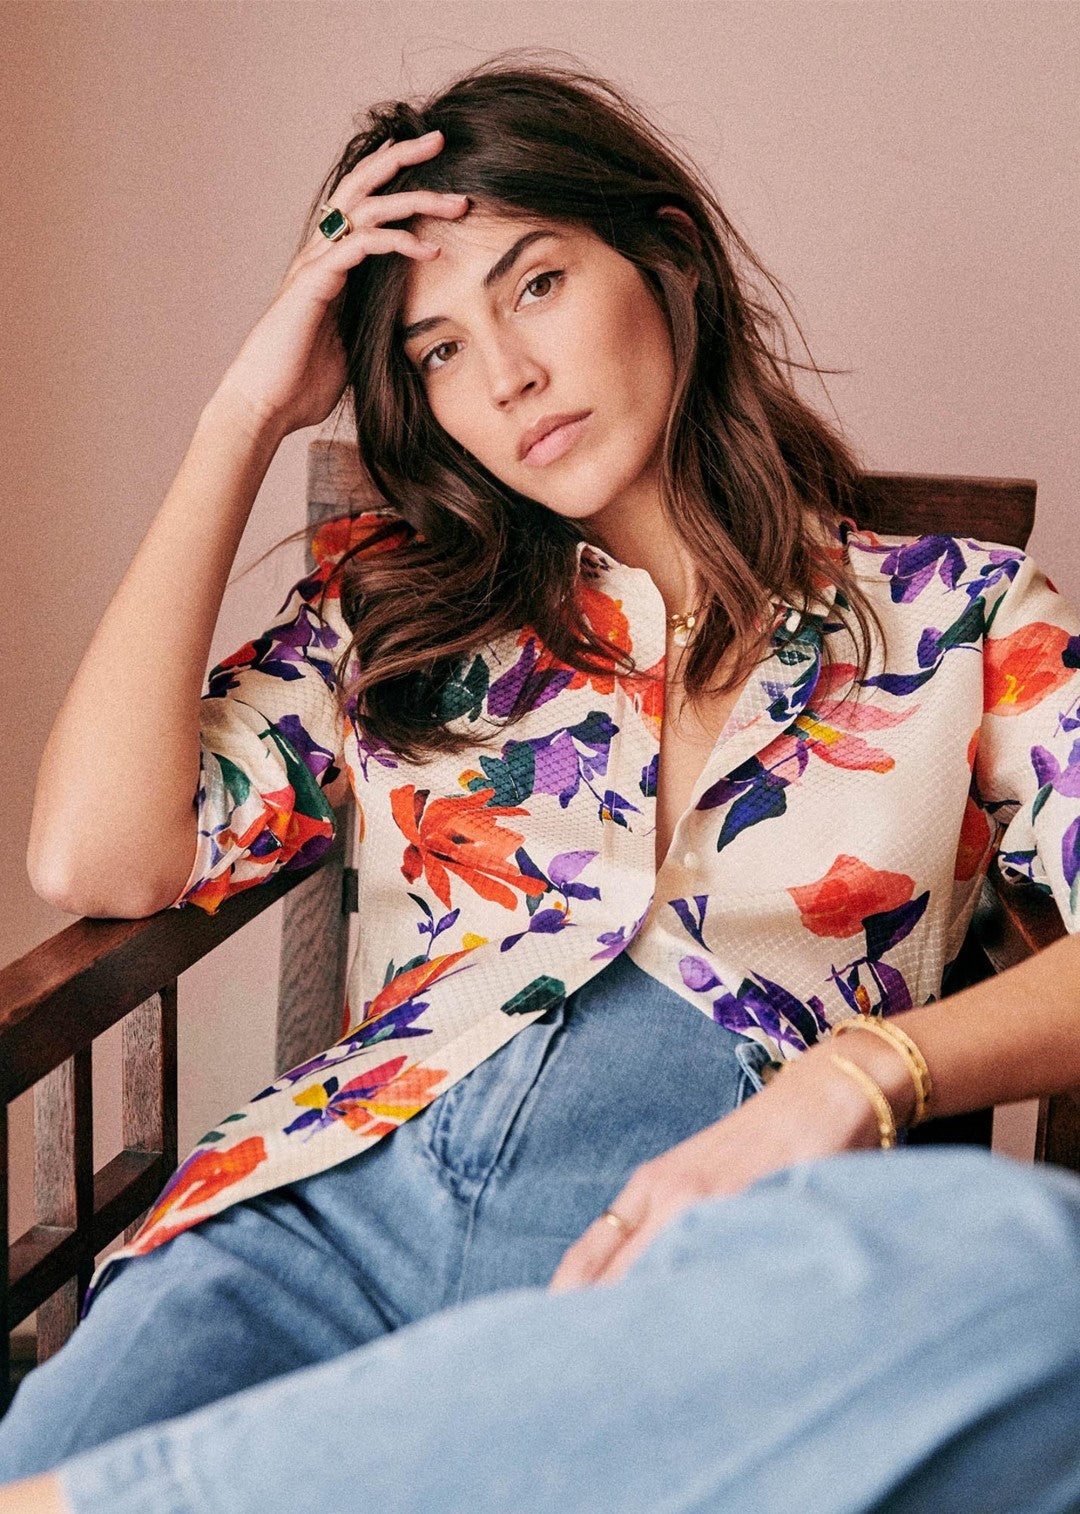 Breezy and bold: woman rocks a floral print Hawaiian shirt with long sleeves.